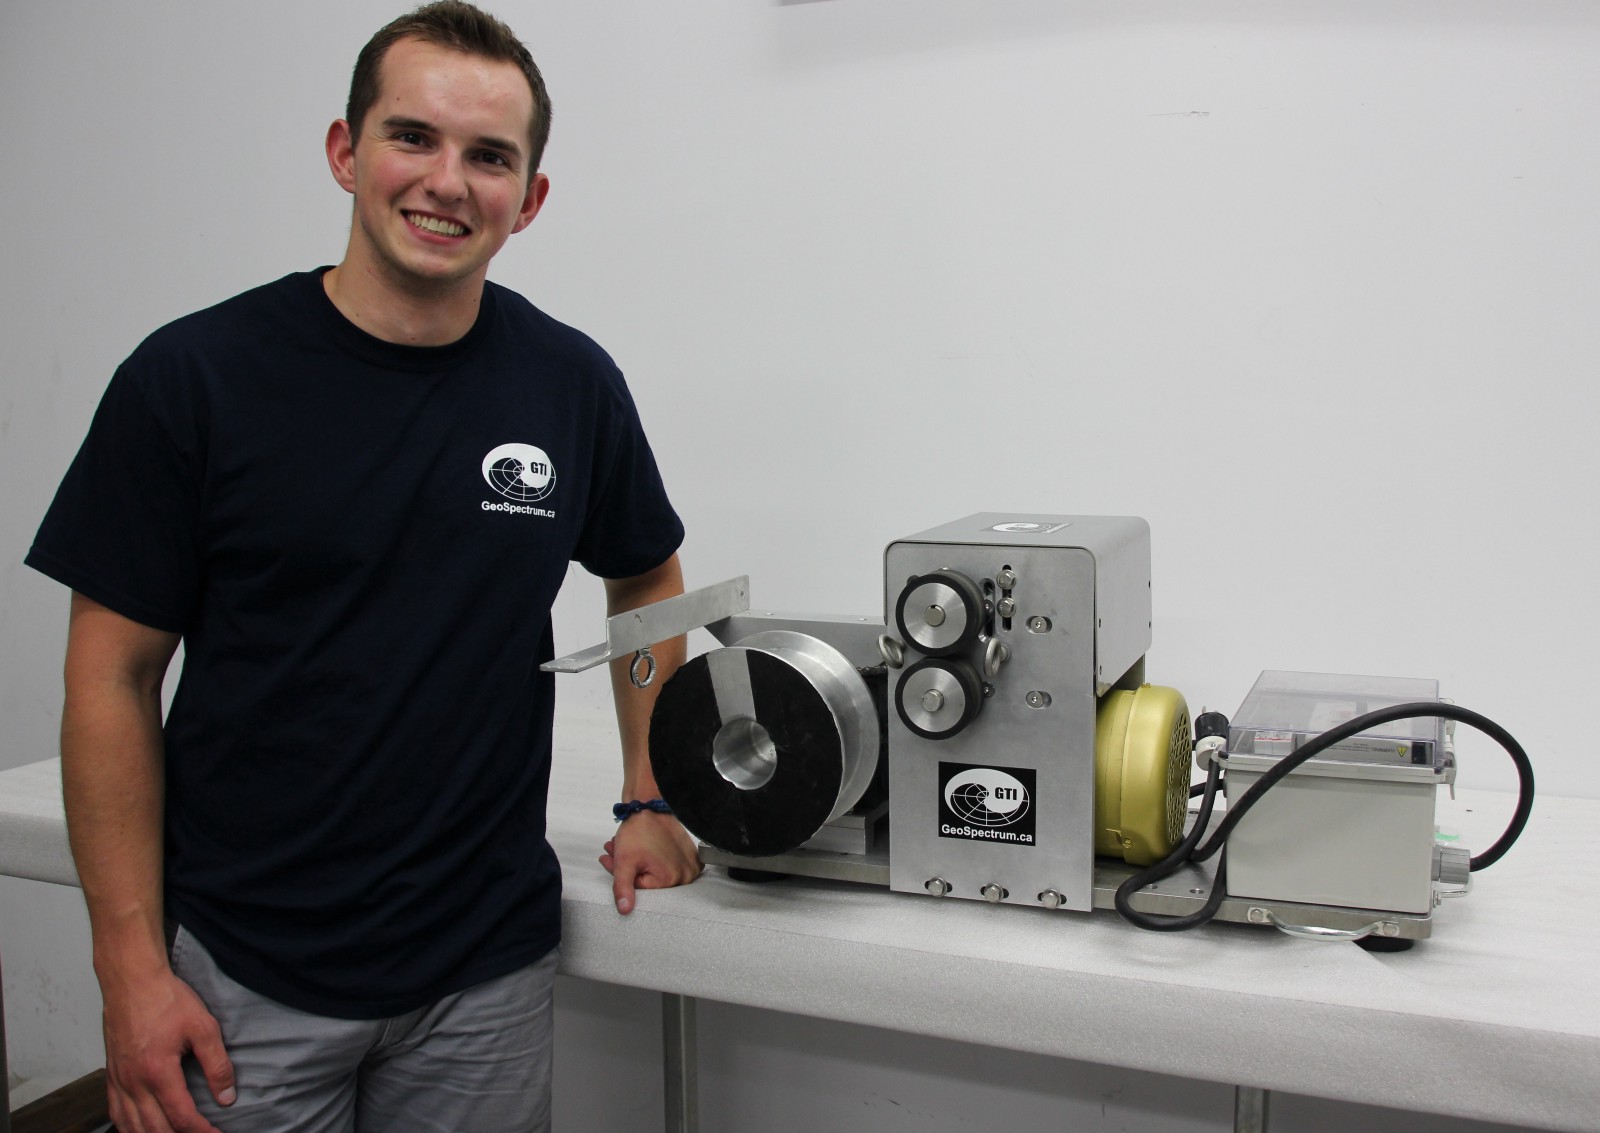 Nick Zachernuk, an engineering student at Dalhousie University, designed and built this winch.